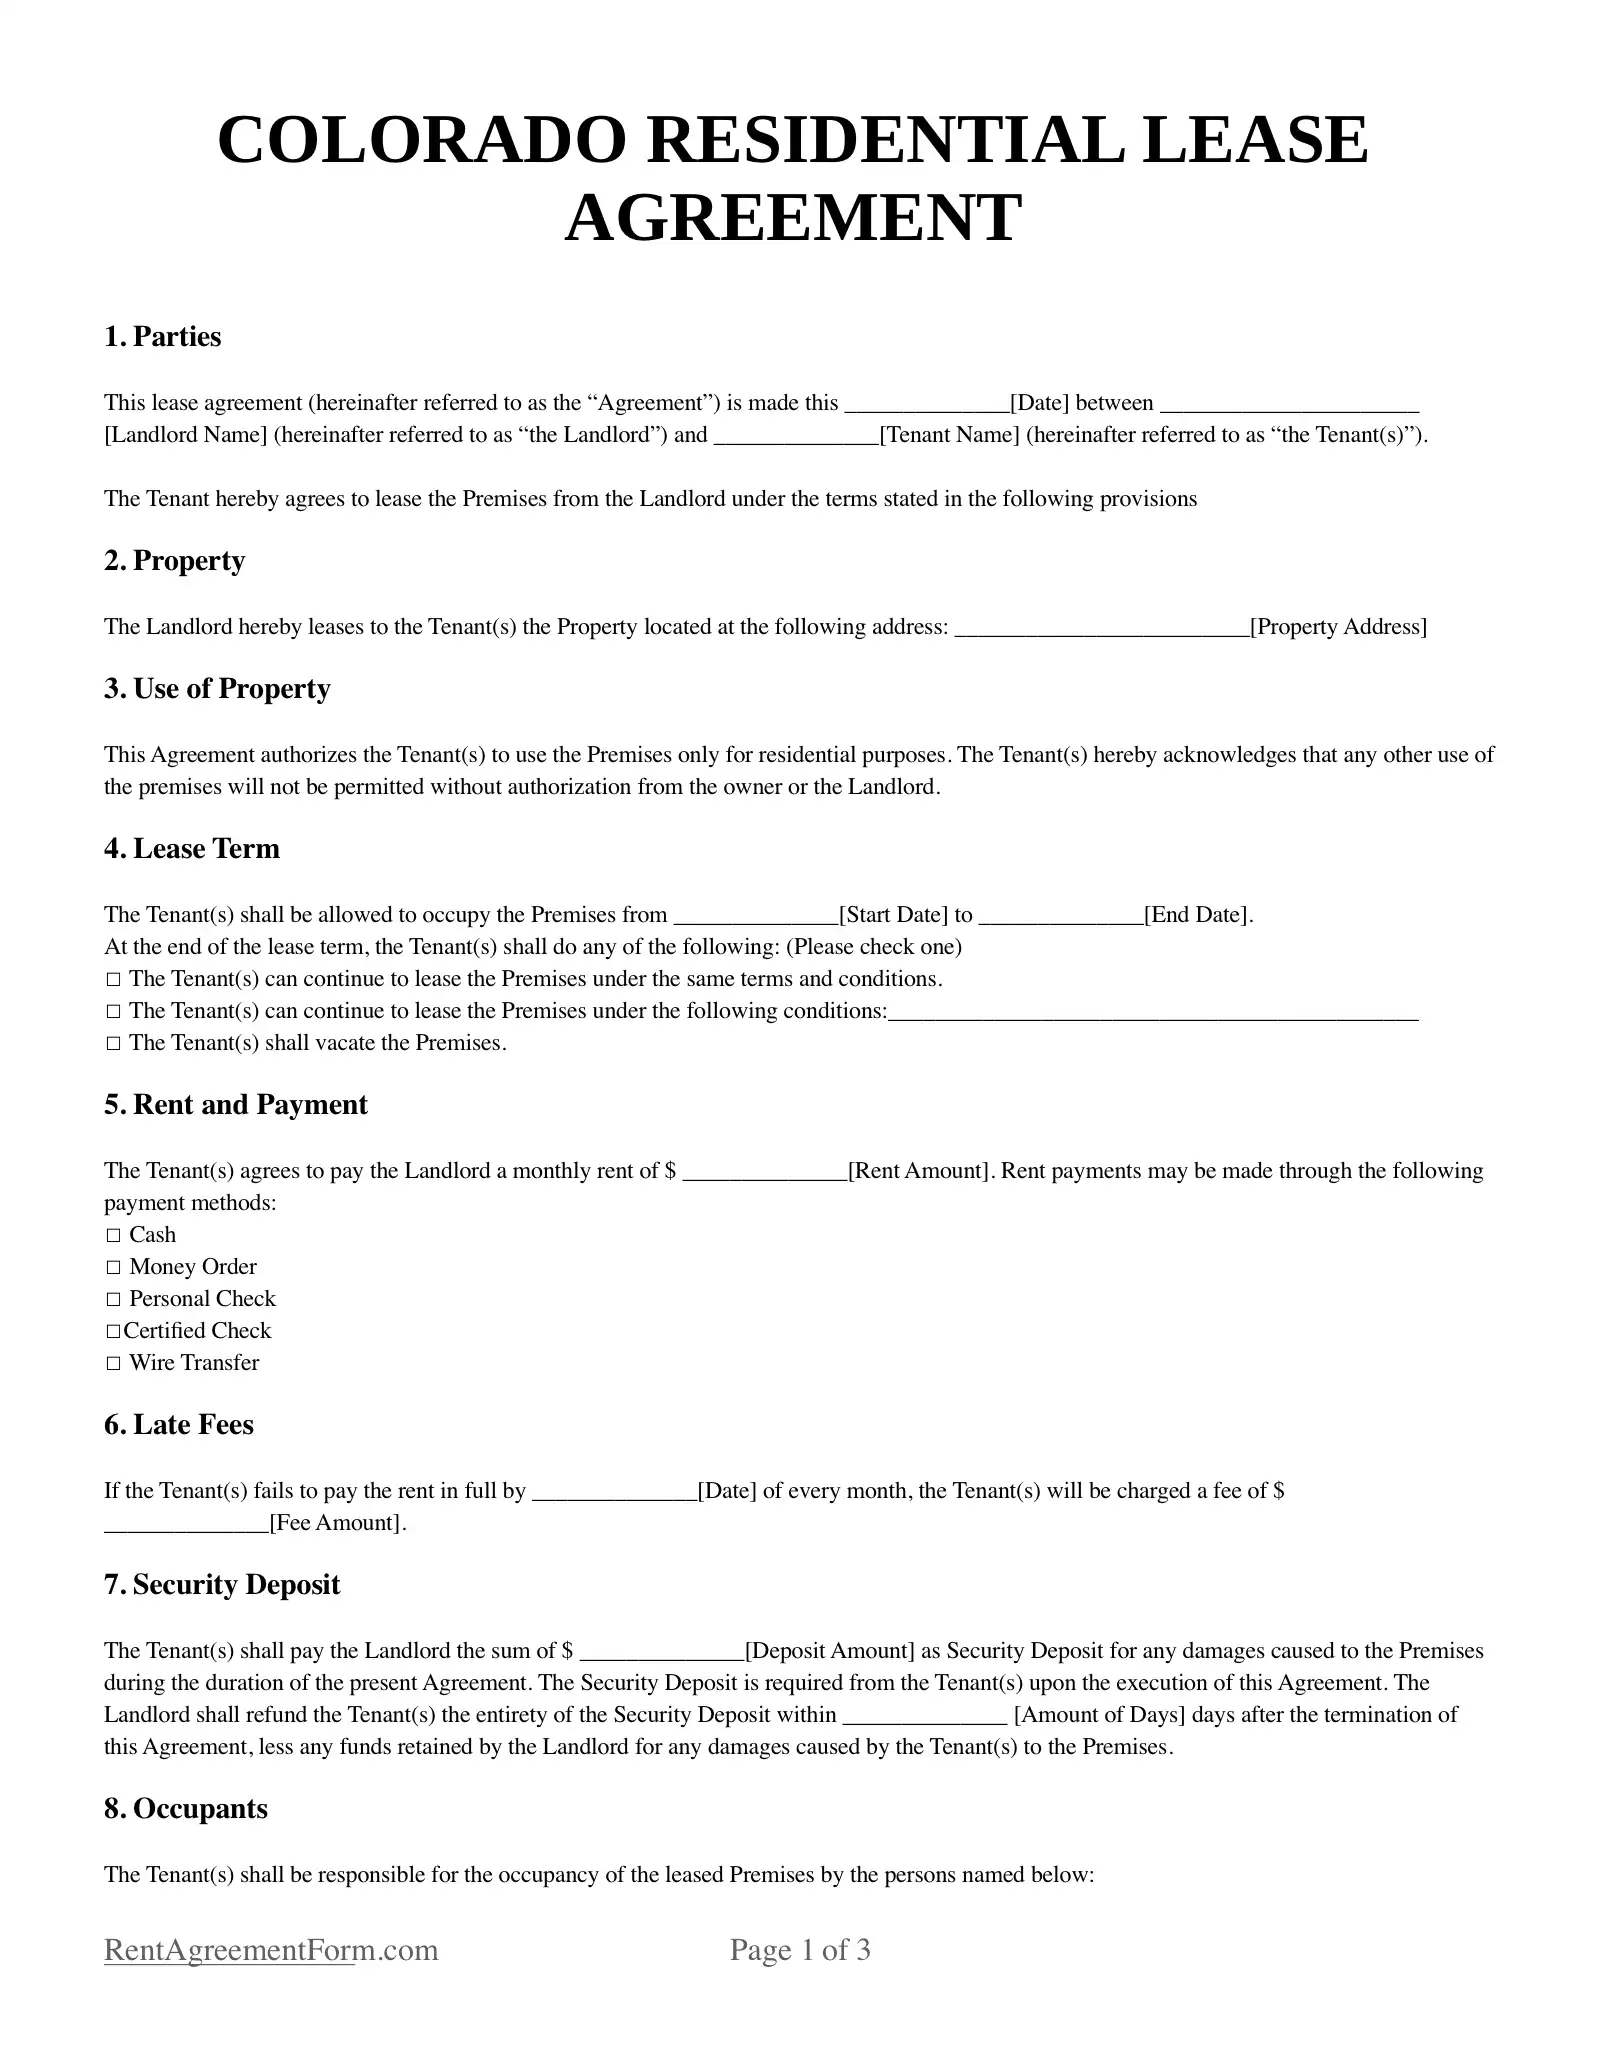 Colorado Residential Lease Agreement Sample